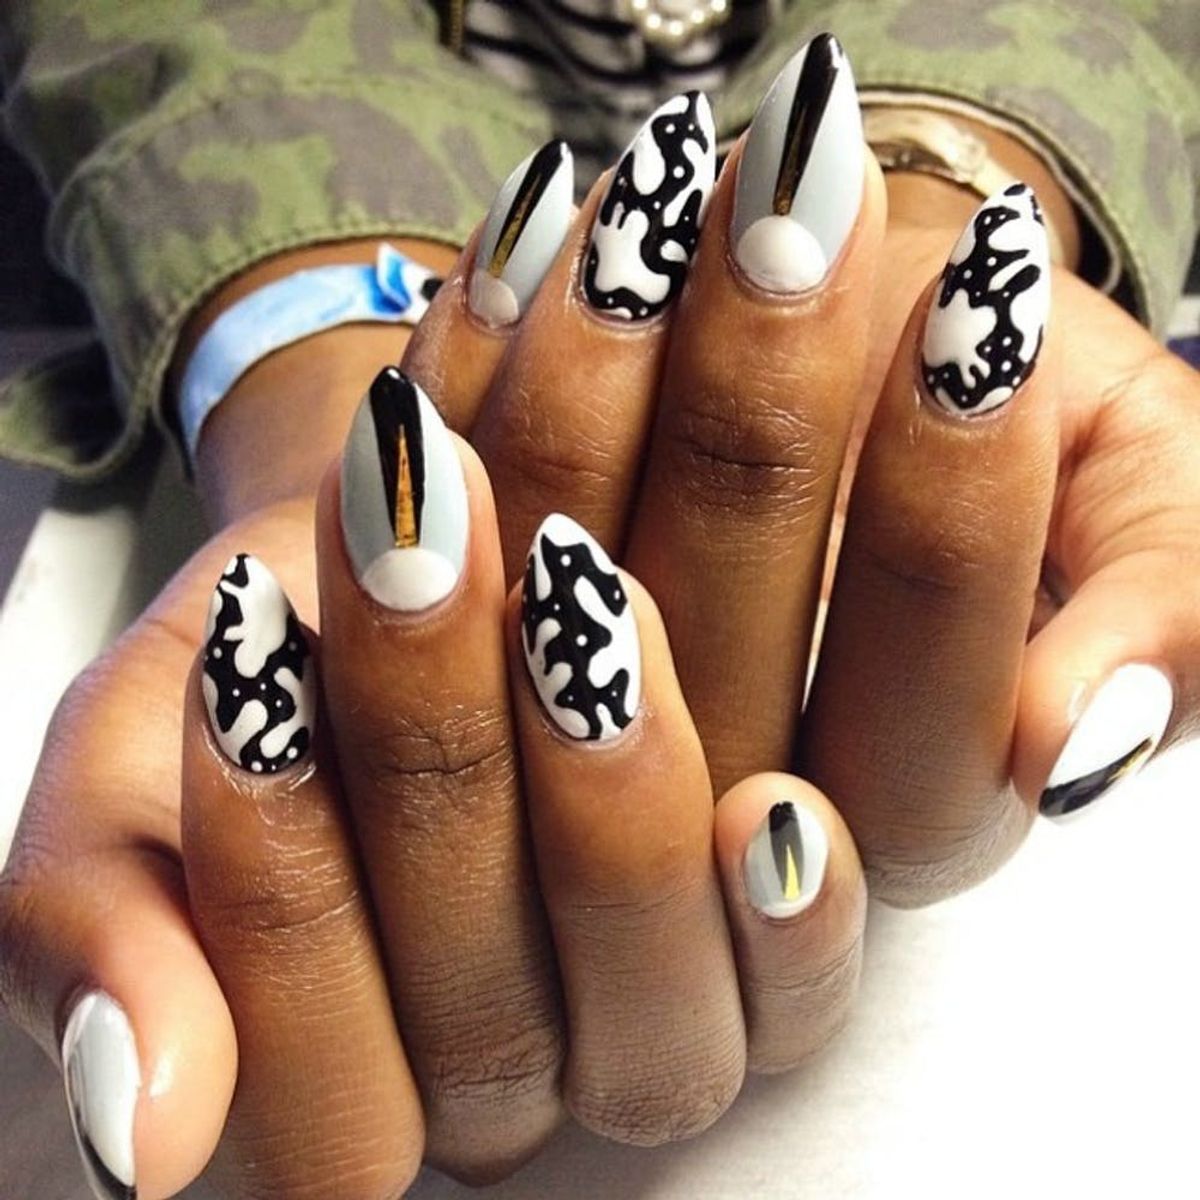 How to Quit Your Job and Become a Nail Artist